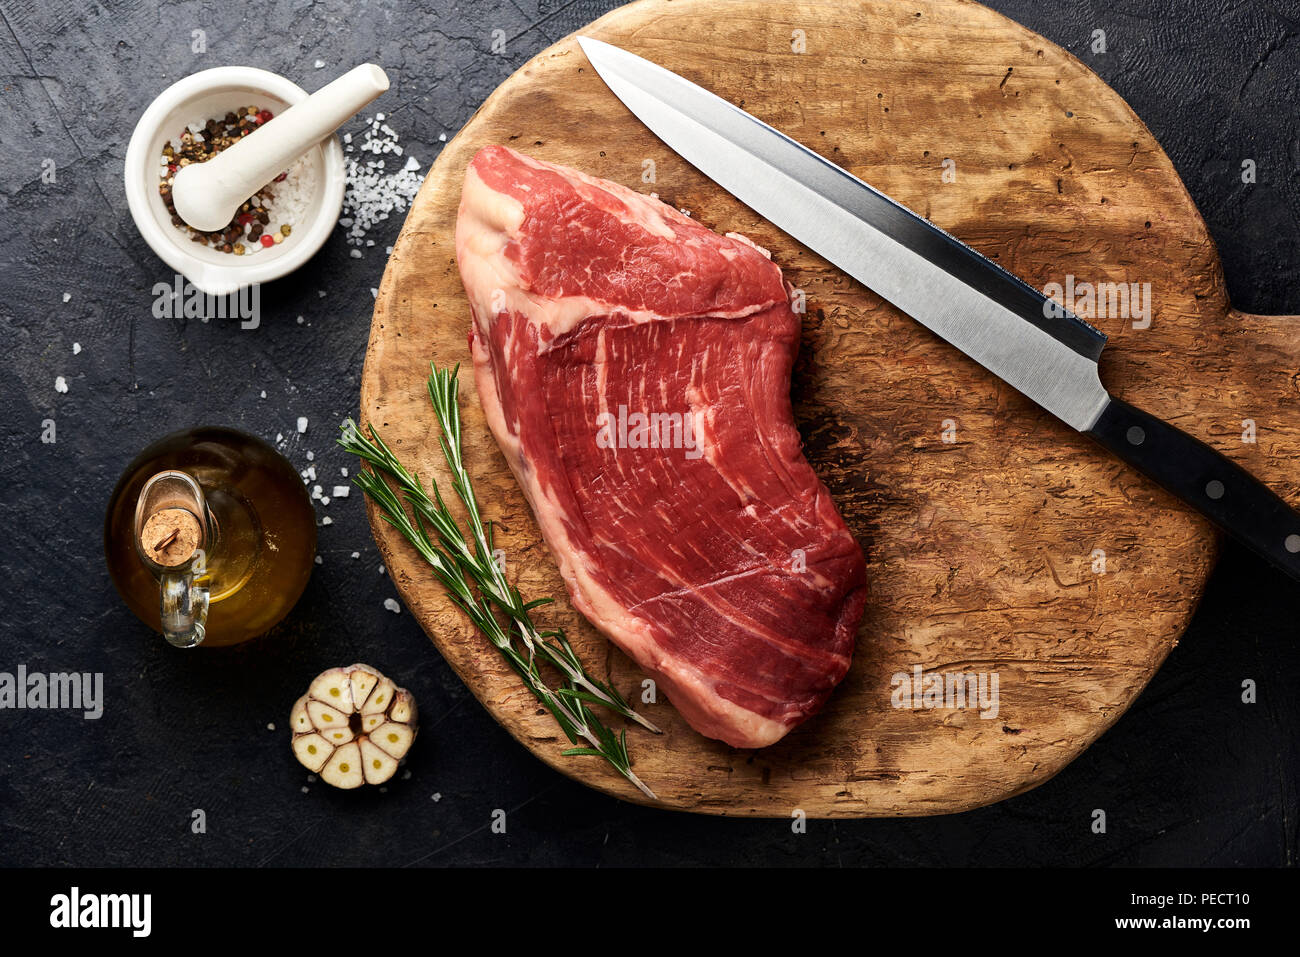 Raw fresh marbled meat Black Angus steak with knife for meat on wooden board. Meat on black background with rosemary, spices, olive oil and garlic. Copy space. Top view. Stock Photo